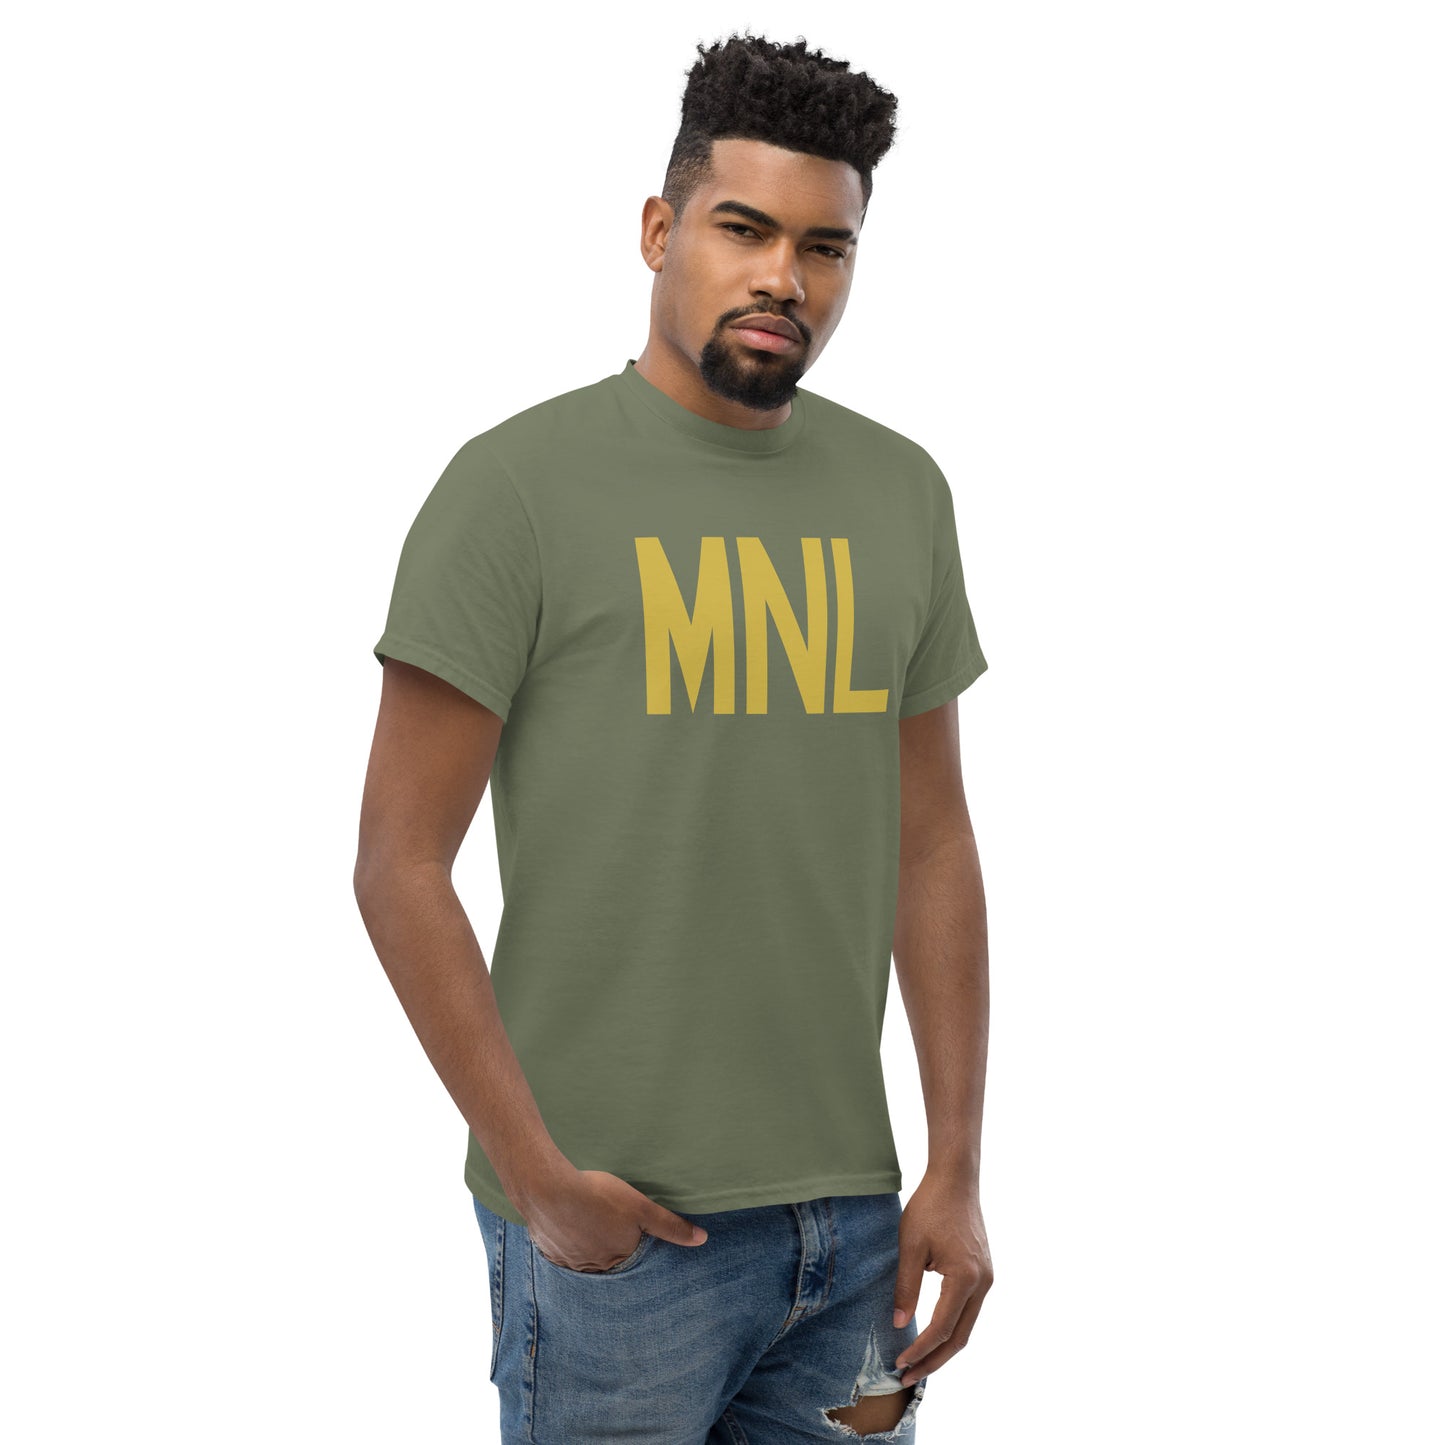 Aviation Enthusiast Men's Tee - Old Gold Graphic • MNL Manila • YHM Designs - Image 08